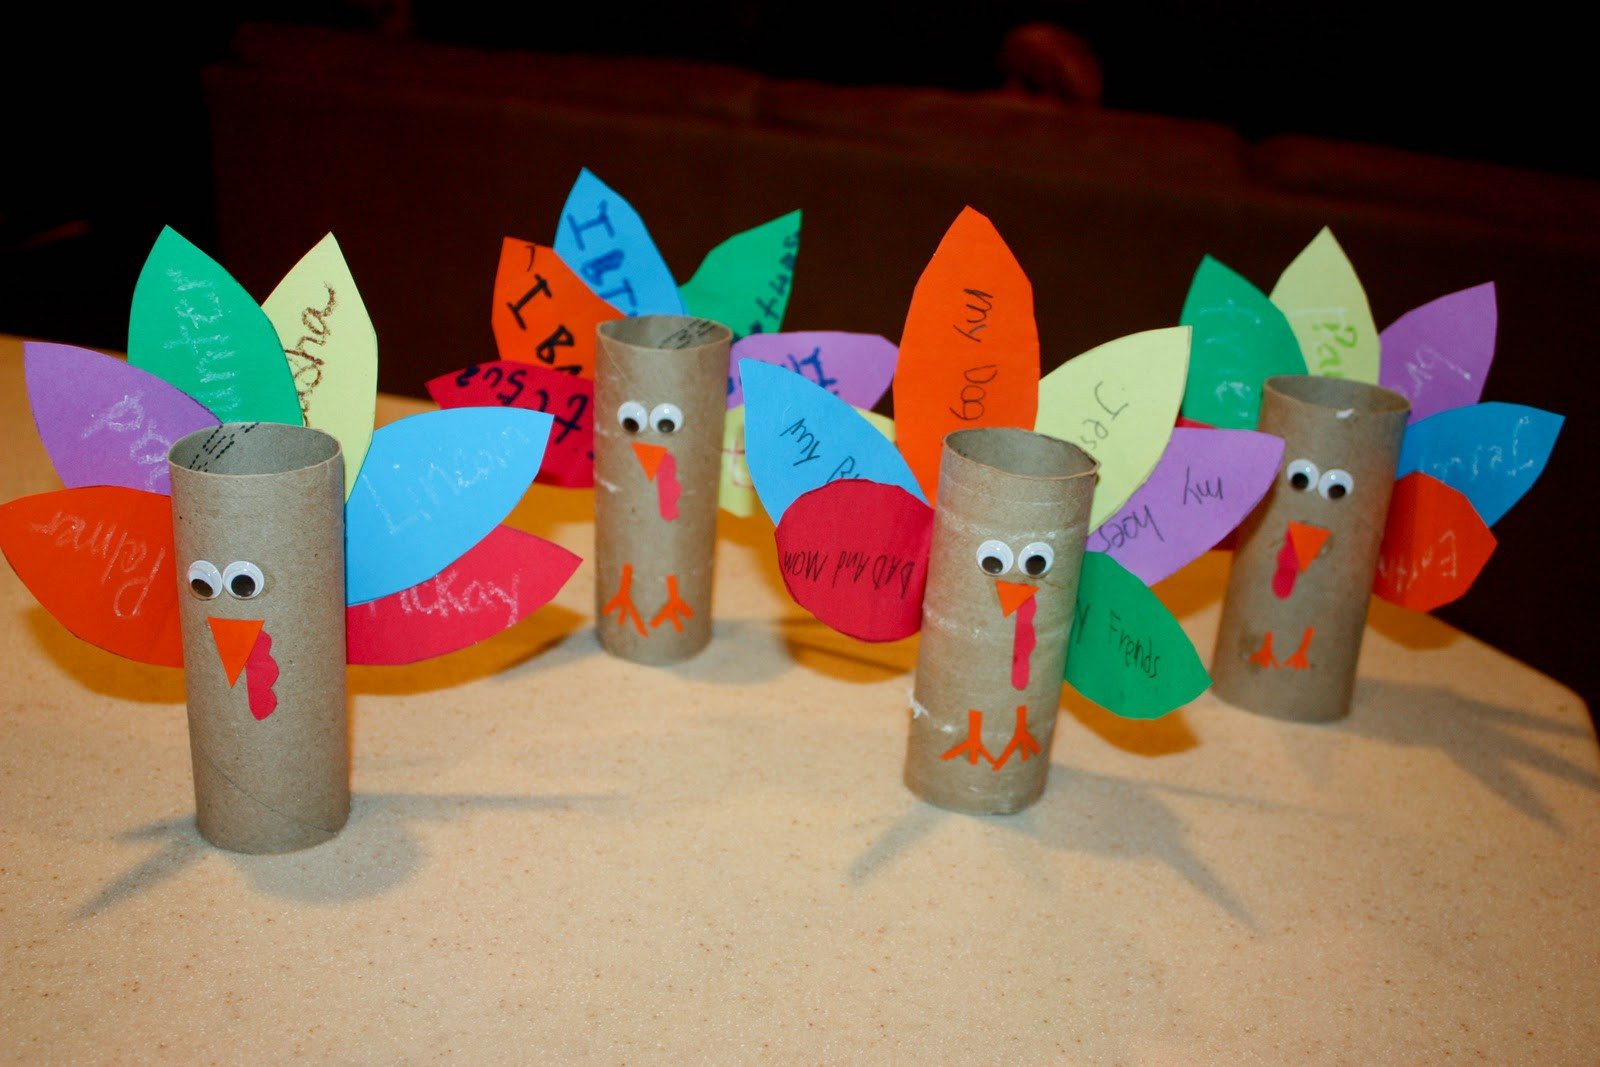 Toilet Paper Roll Thanksgiving Crafts
 Toilet Paper Roll Turkey Craft Paper Crafts Ideas for Kids